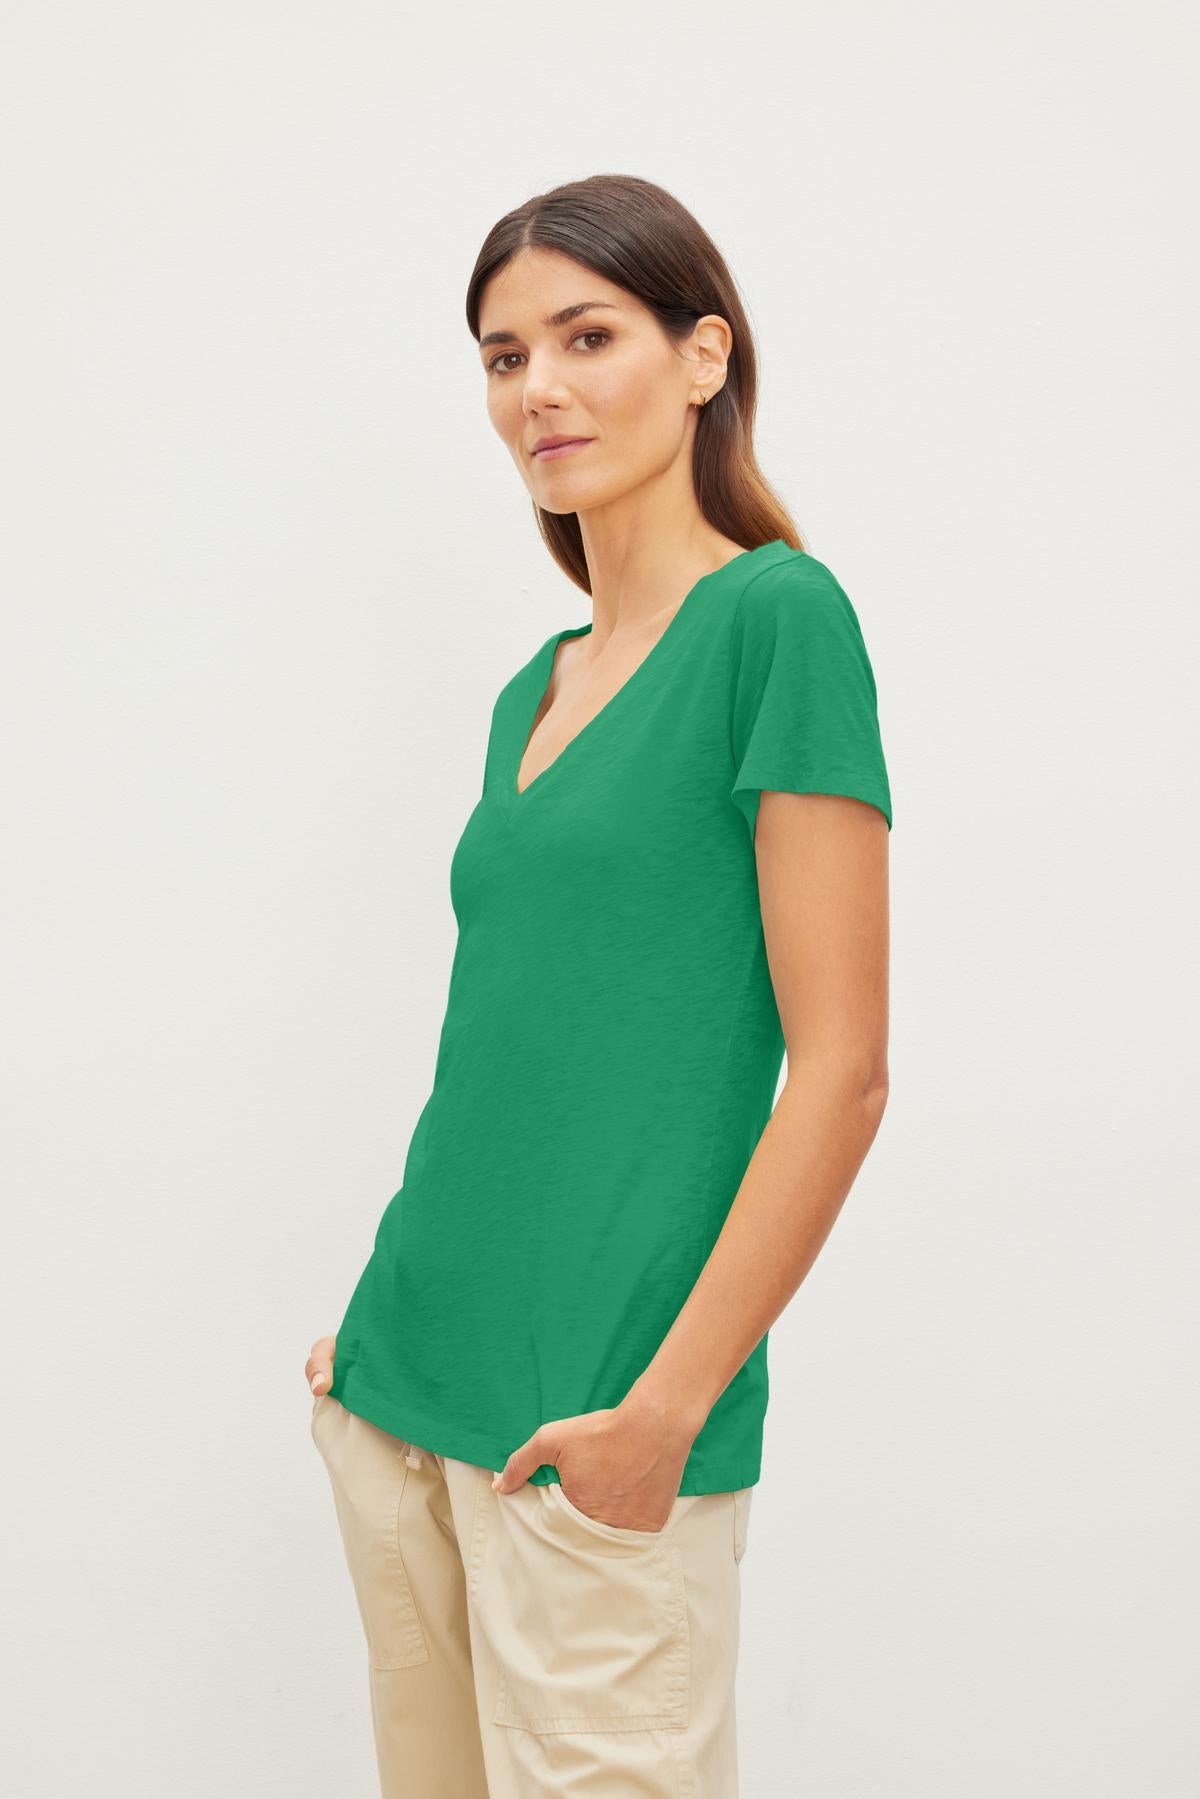   Woman in a LILITH COTTON SLUB V-NECK TEE by Velvet by Graham & Spencer and beige pants standing against a white background, looking at the camera with a soft smile. 